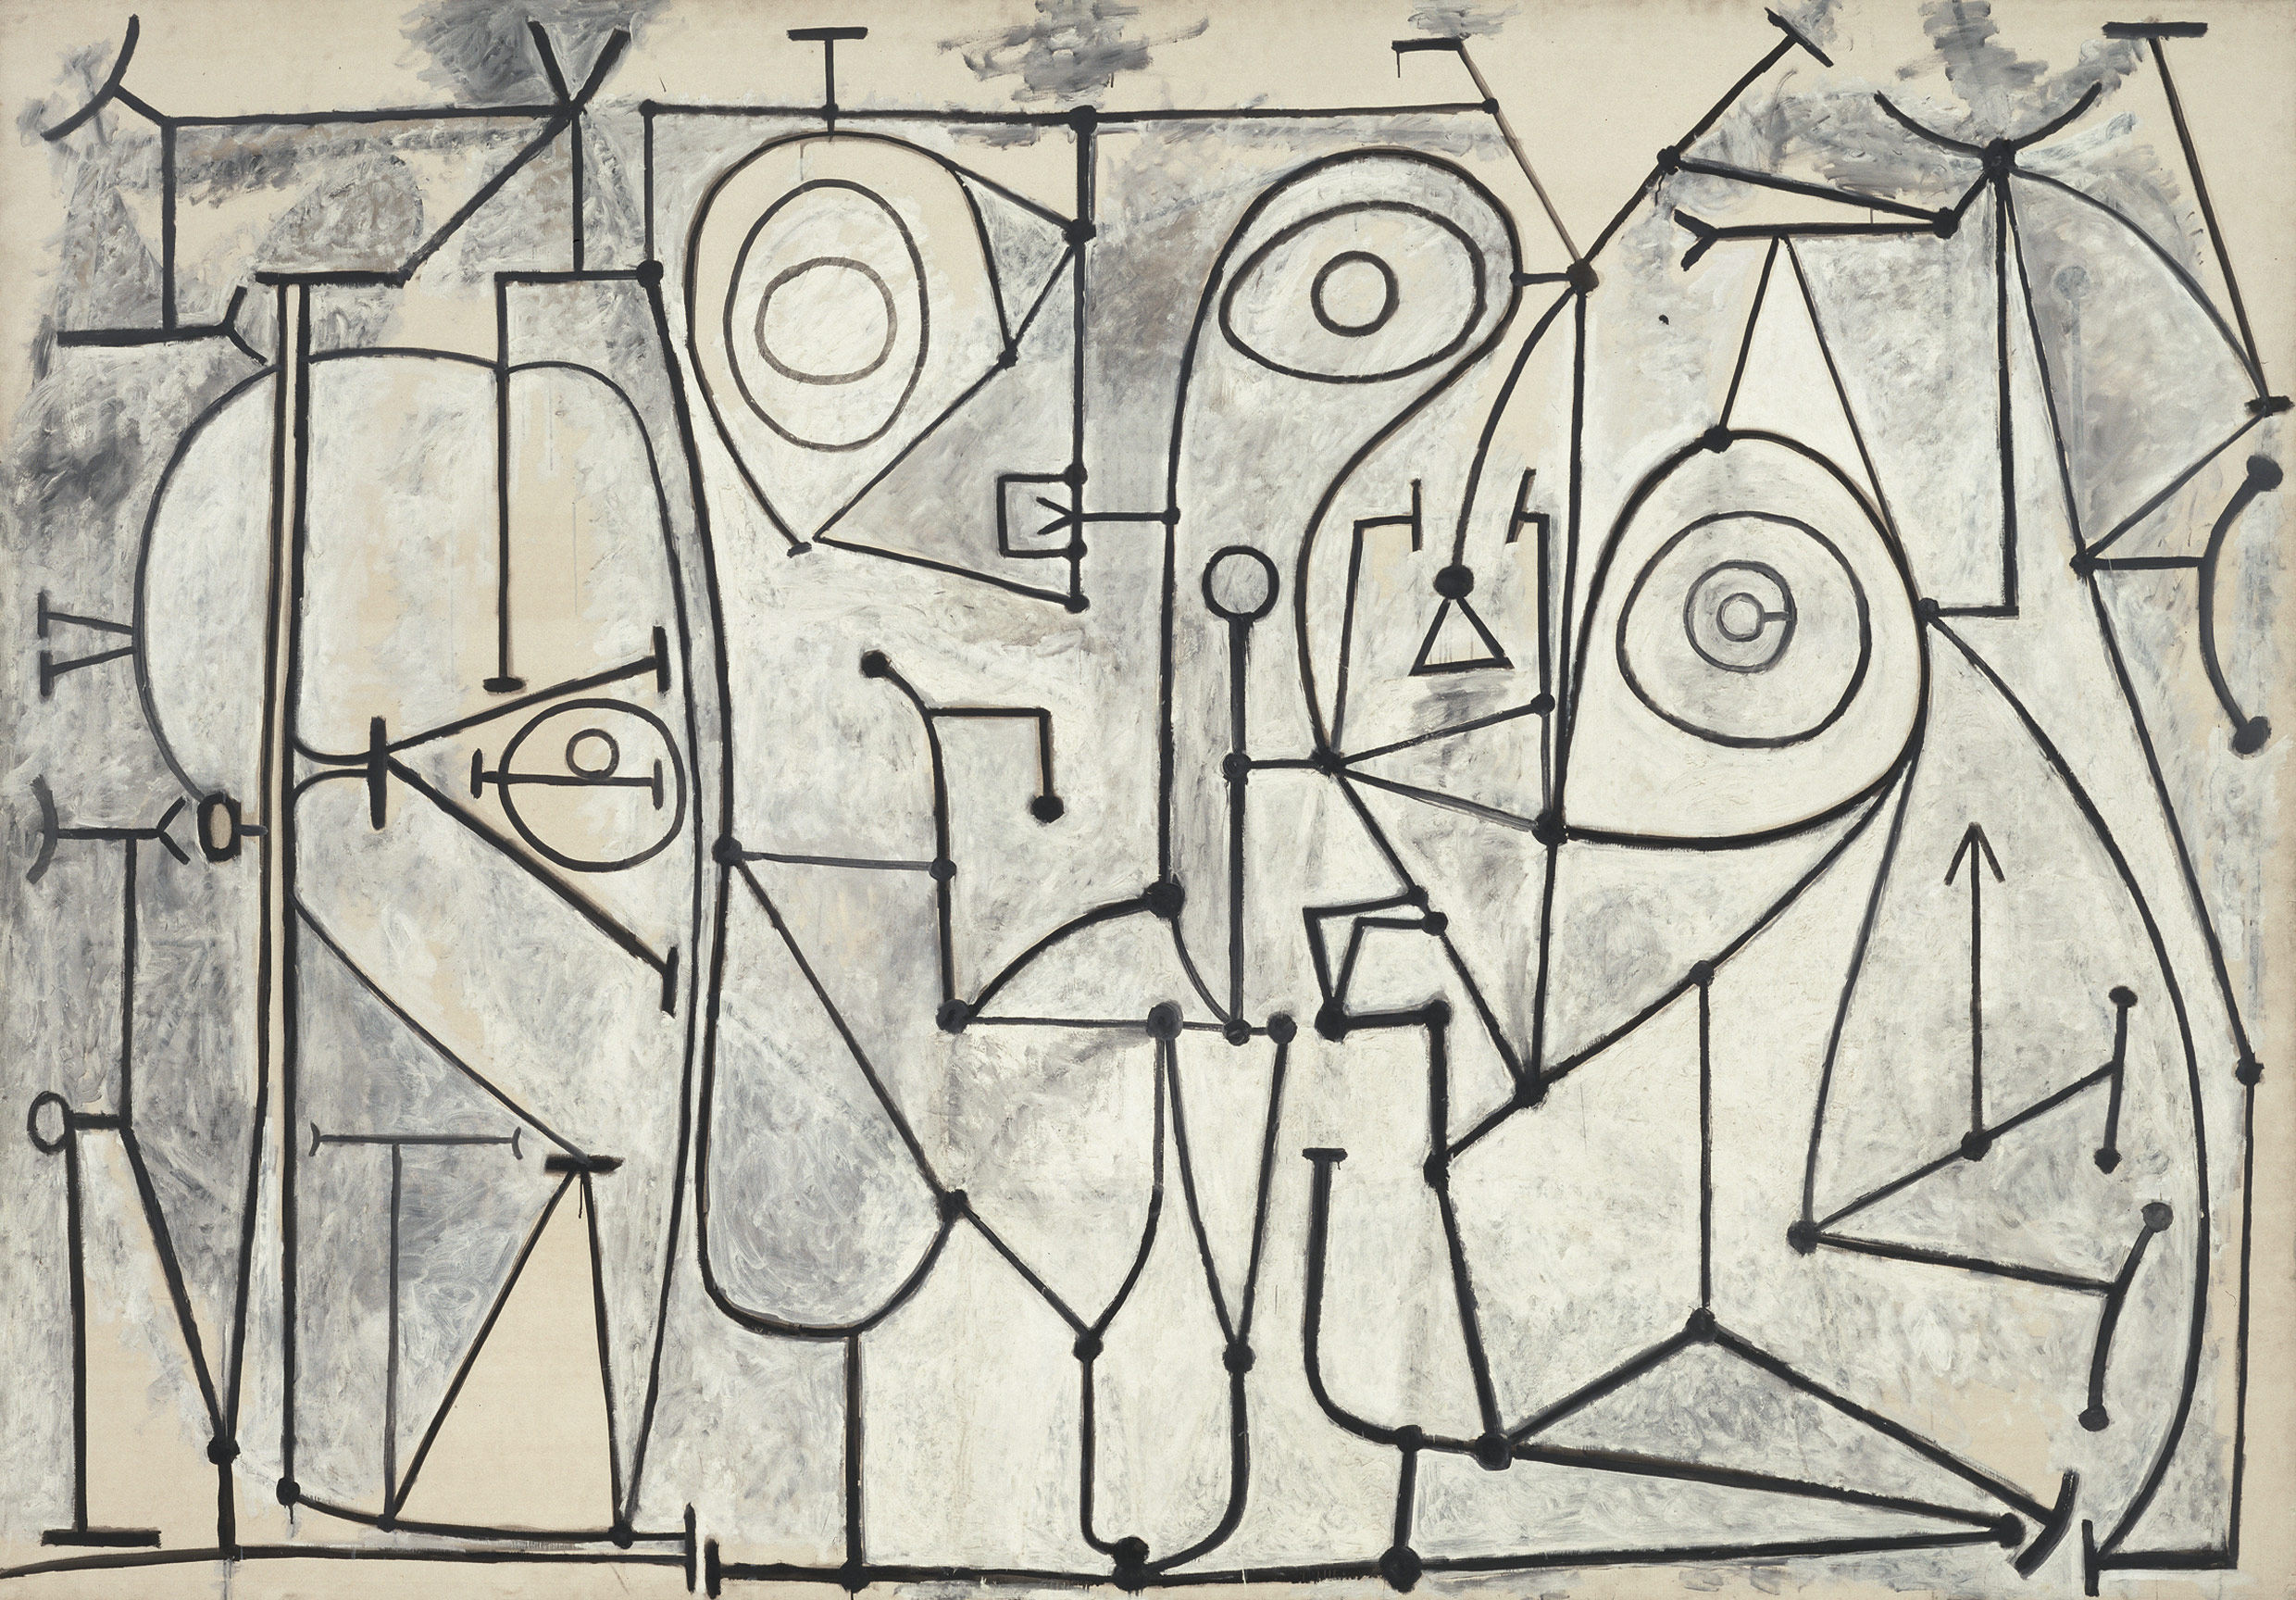 Pablo Picasso | Pencil Drawing (1956) | Available for Sale | Artsy